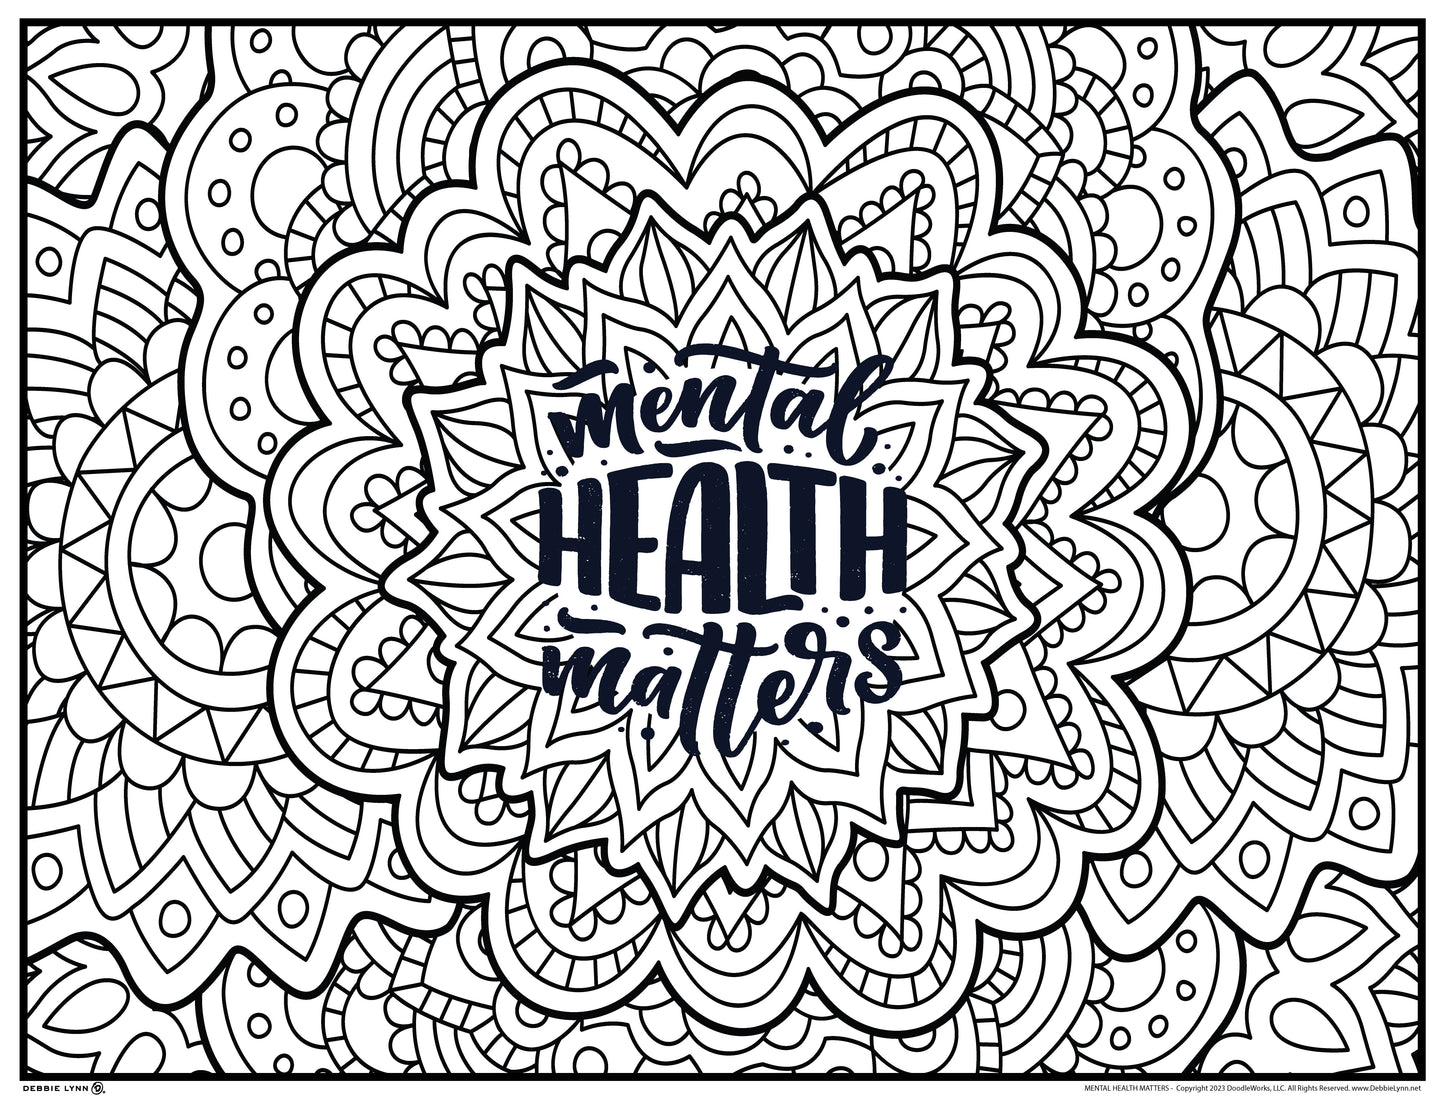 Mental Health Matters Giant Coloring Poster